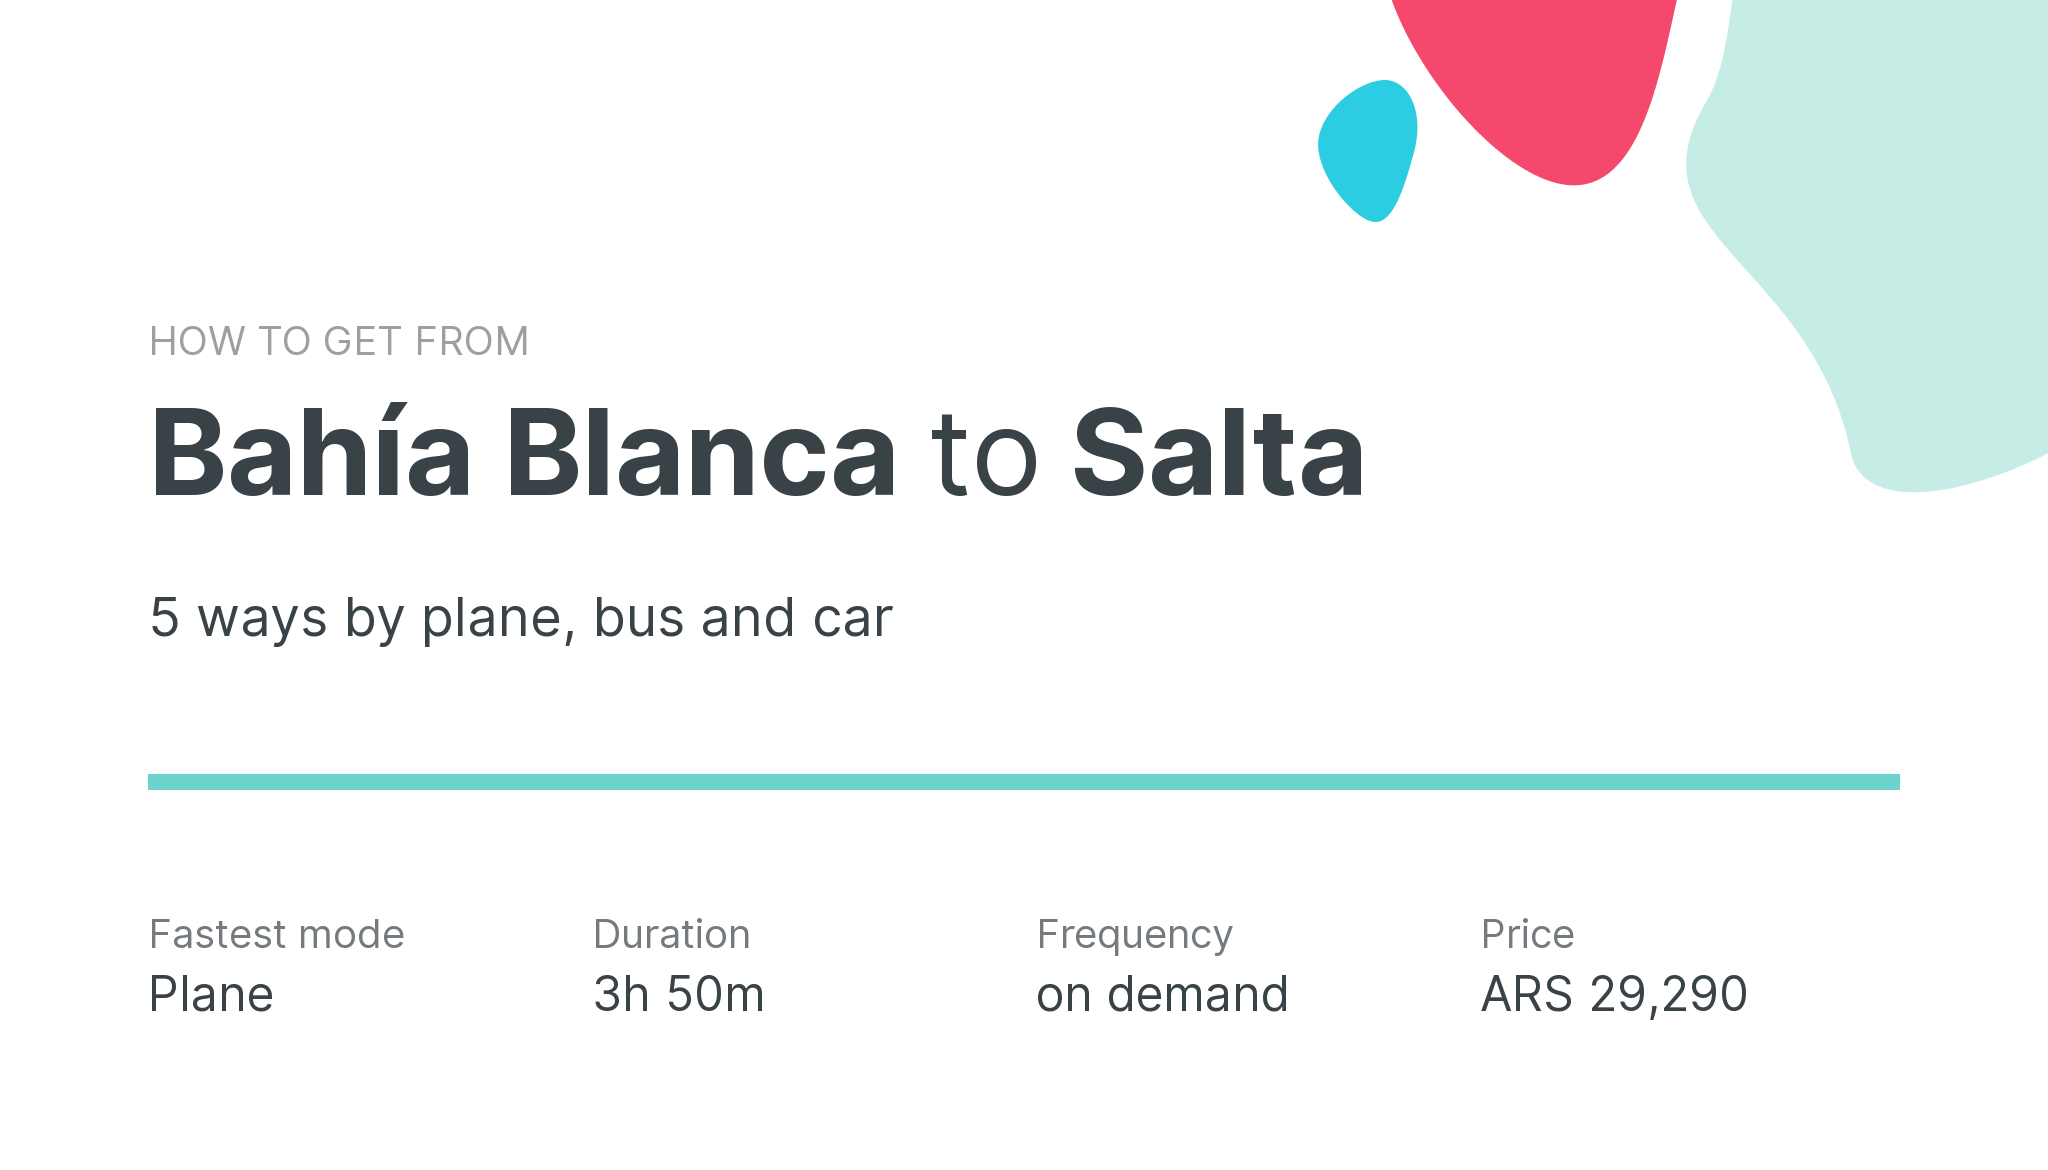 How do I get from Bahía Blanca to Salta